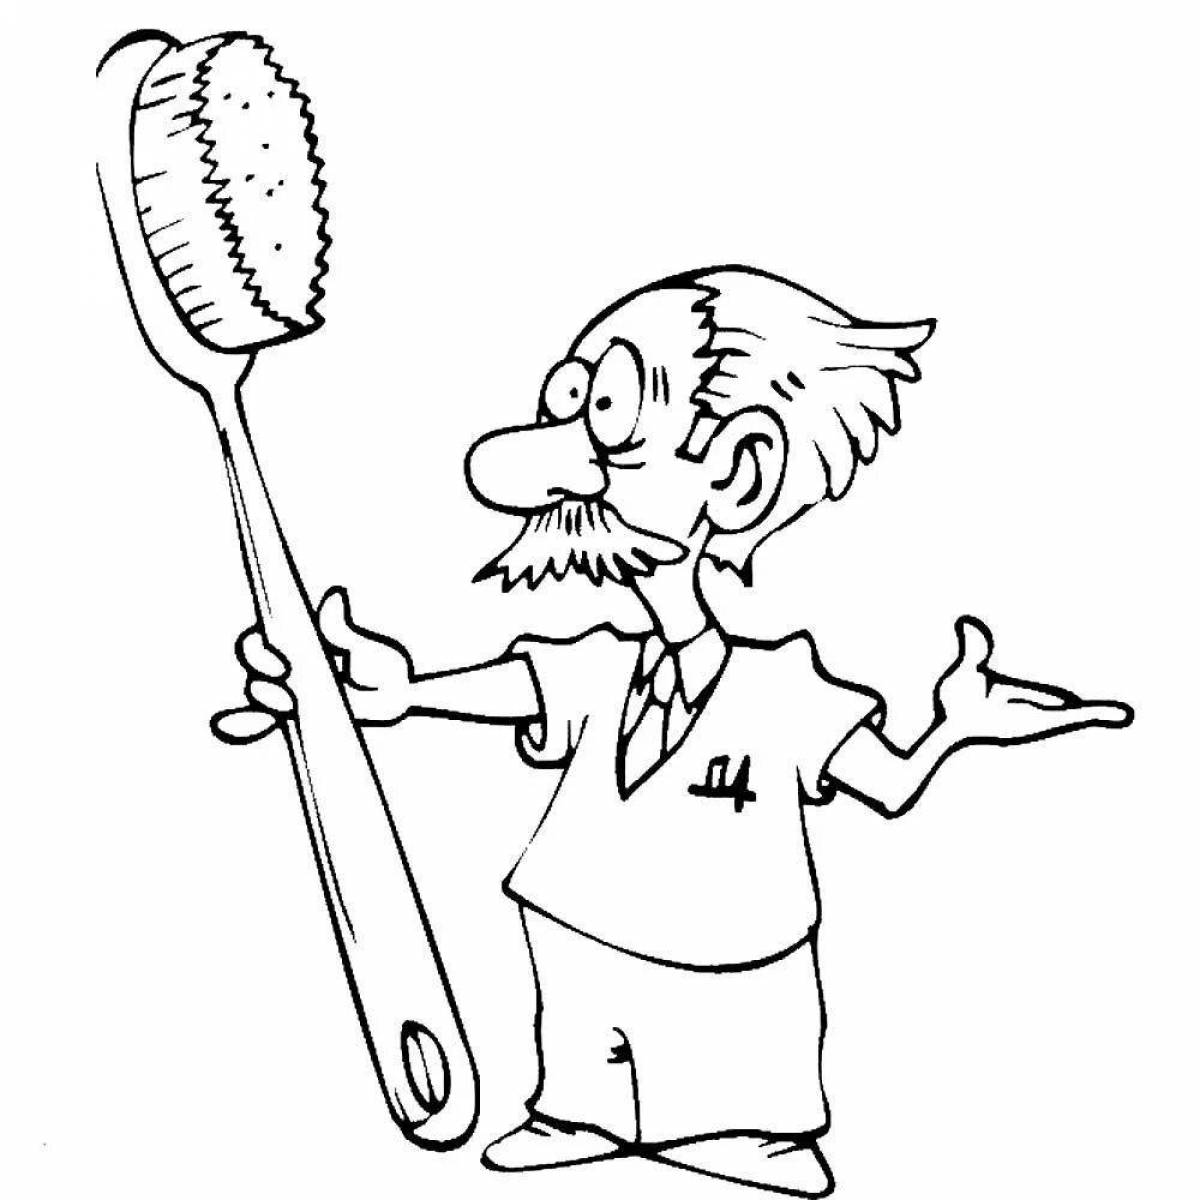 Toothbrush and toothpaste color-explosion coloring page